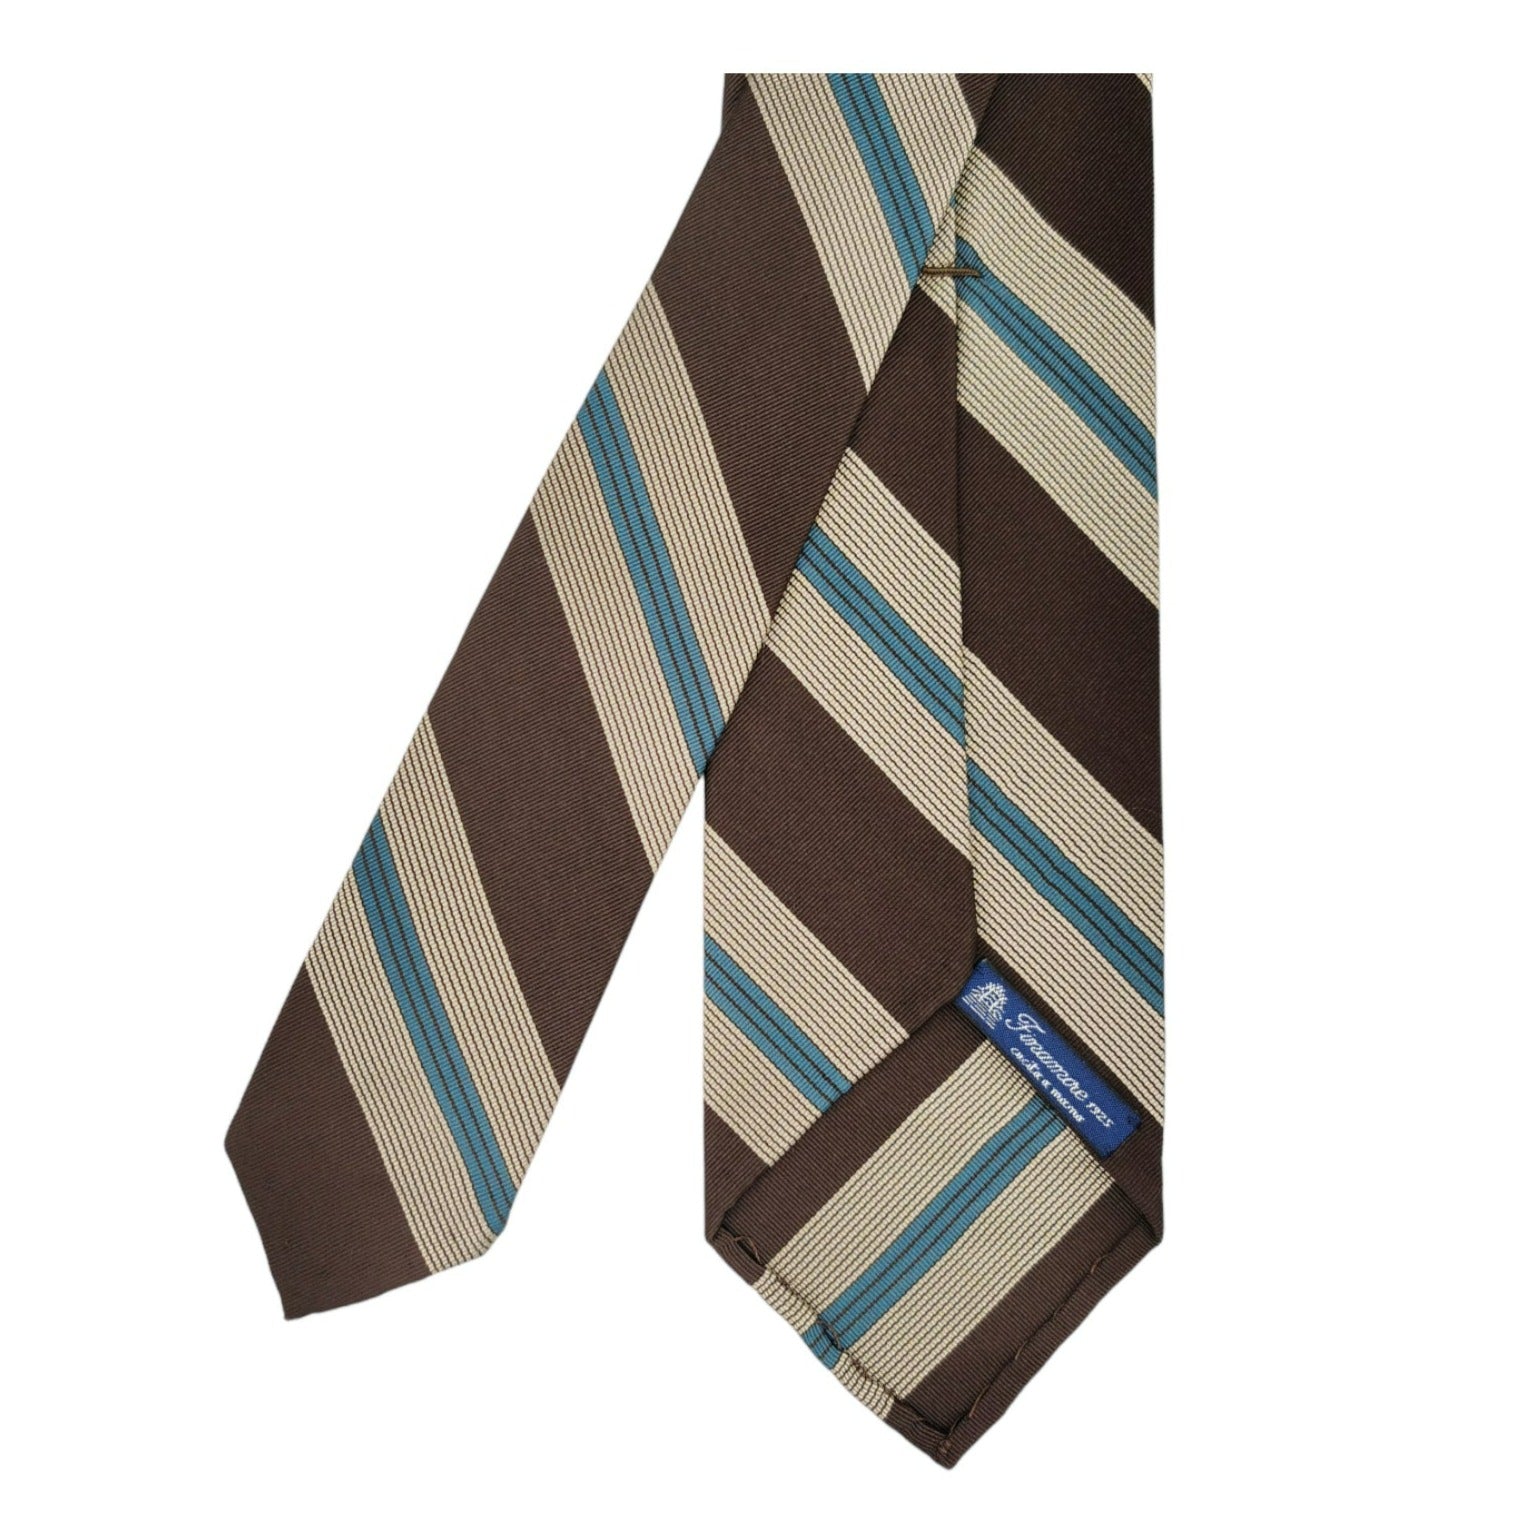 Anversa silk and cotton tie, brown turquoise and sand stripes